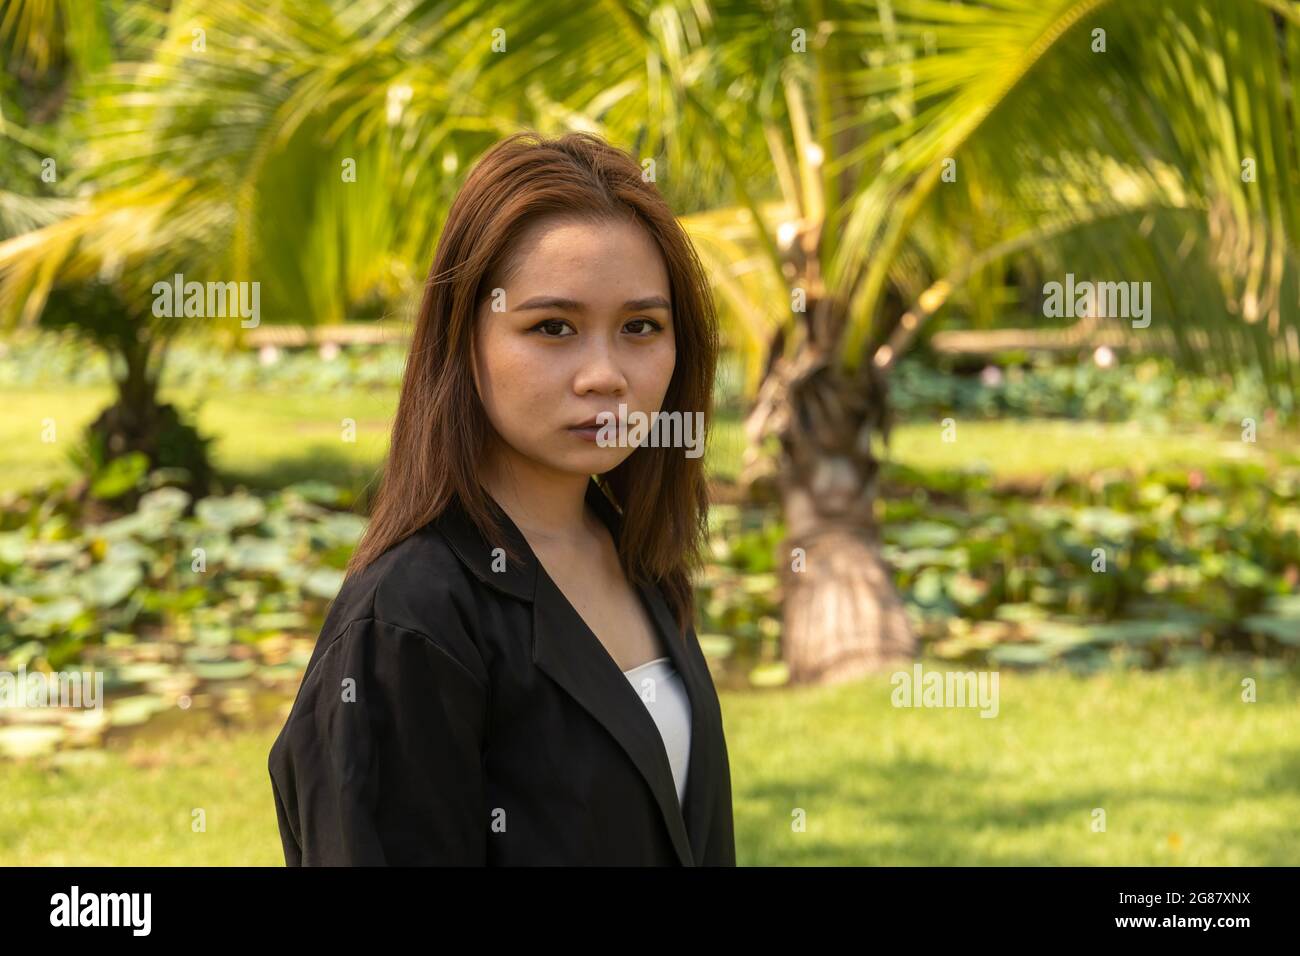 A South Asian young female wearing a black formal coat seriously  posing in the park Stock Photo